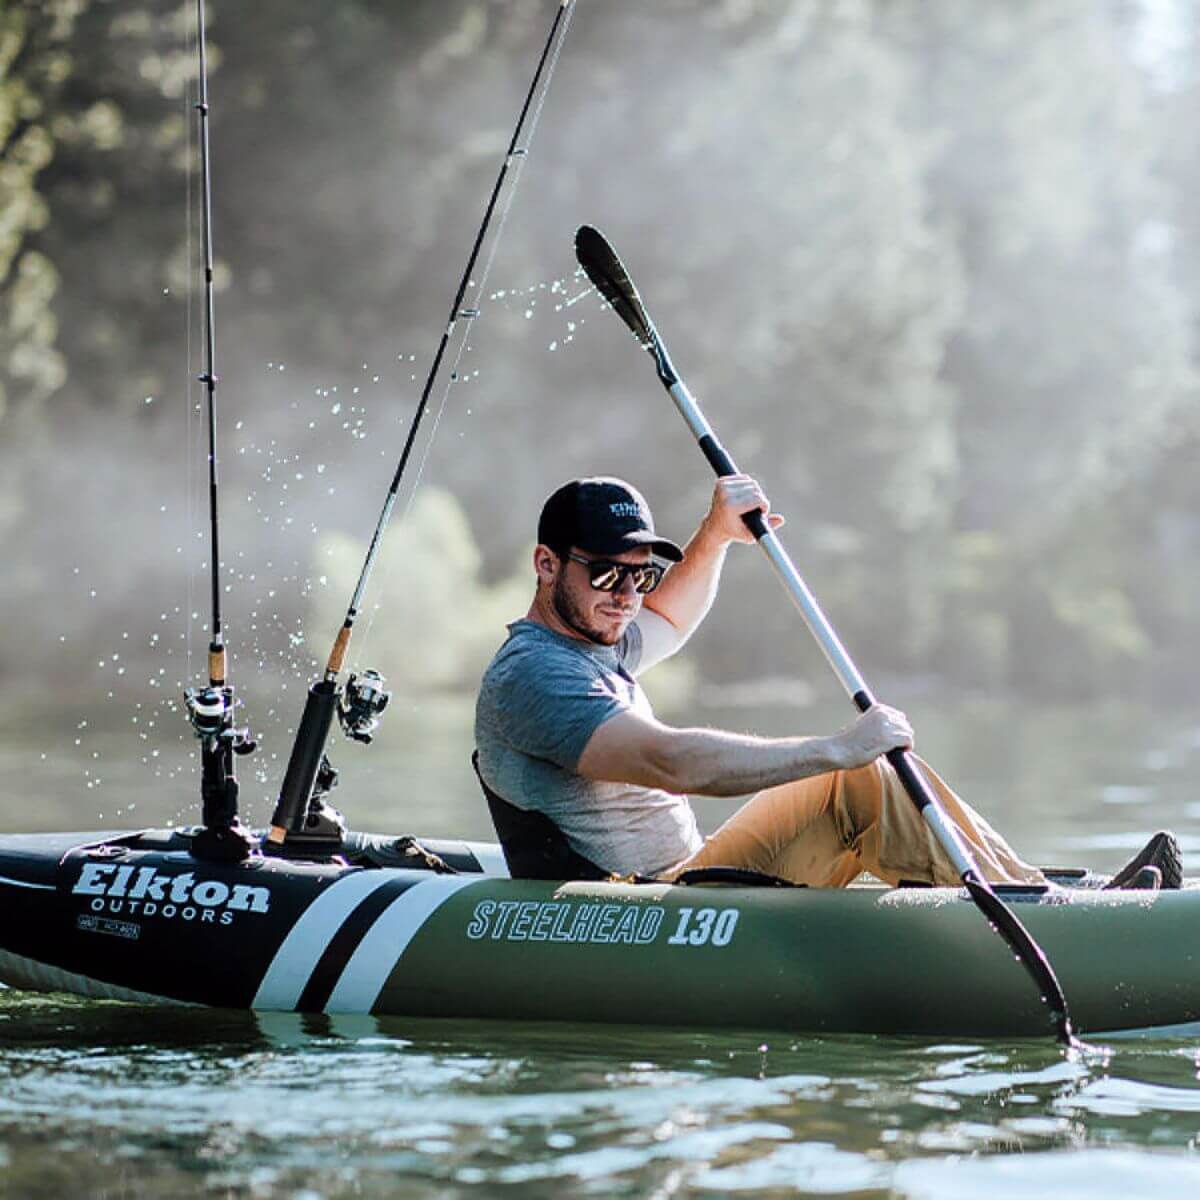 Inflatable Fishing Kayak Showdown: 7 Boats to Take You From Novice to Pro!